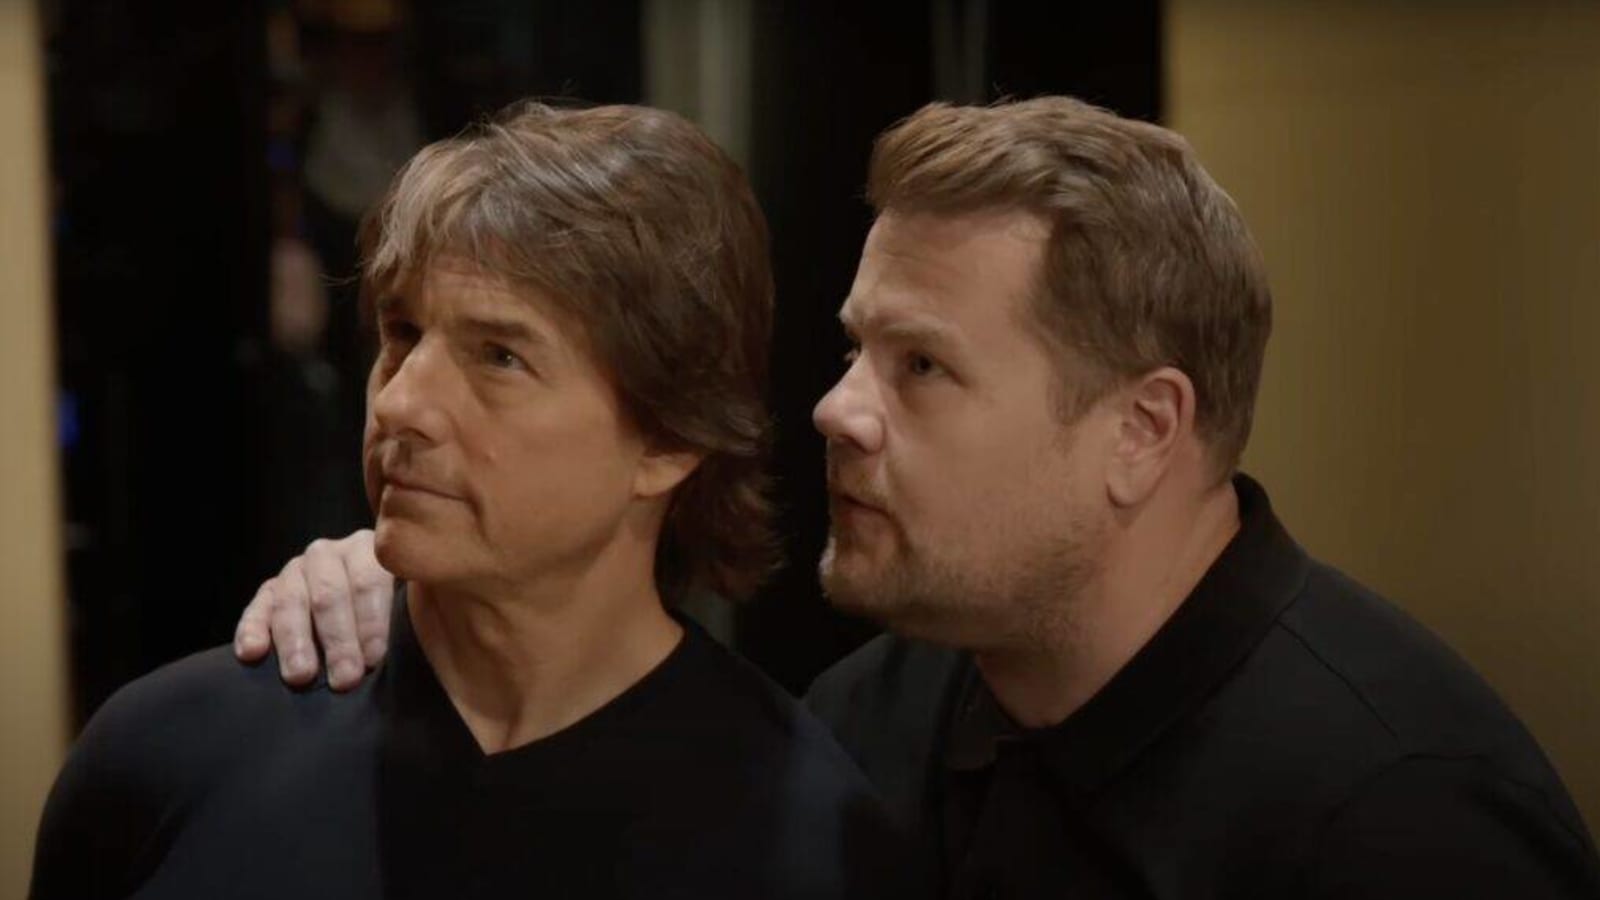 Watch: James Corden's last 'Late Late Show' with Adele, Tom Cruise, more